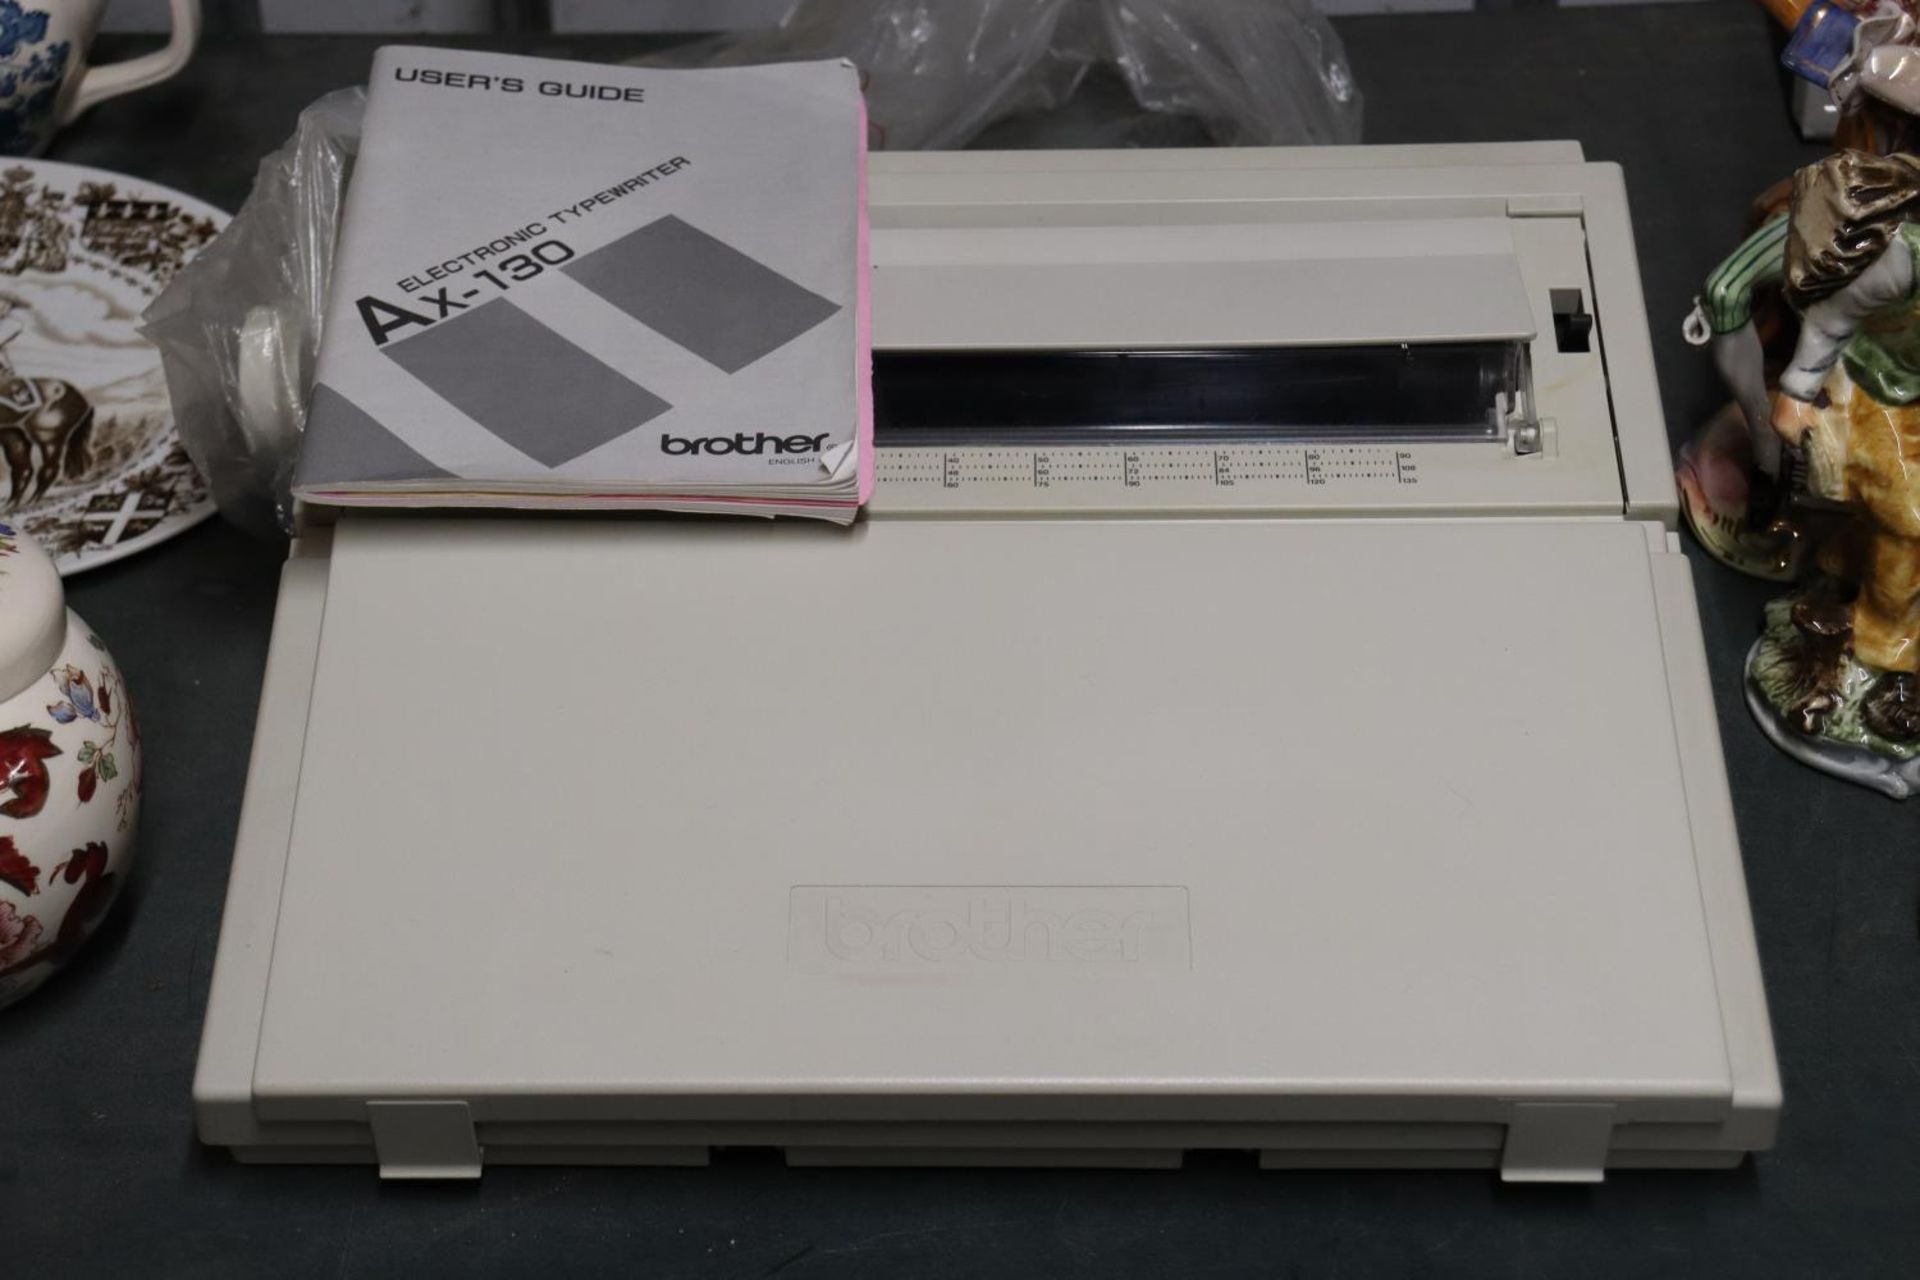 A BROTHER AX-130 ELECTRIC TYPEWRITER AND USER'S GUIDE